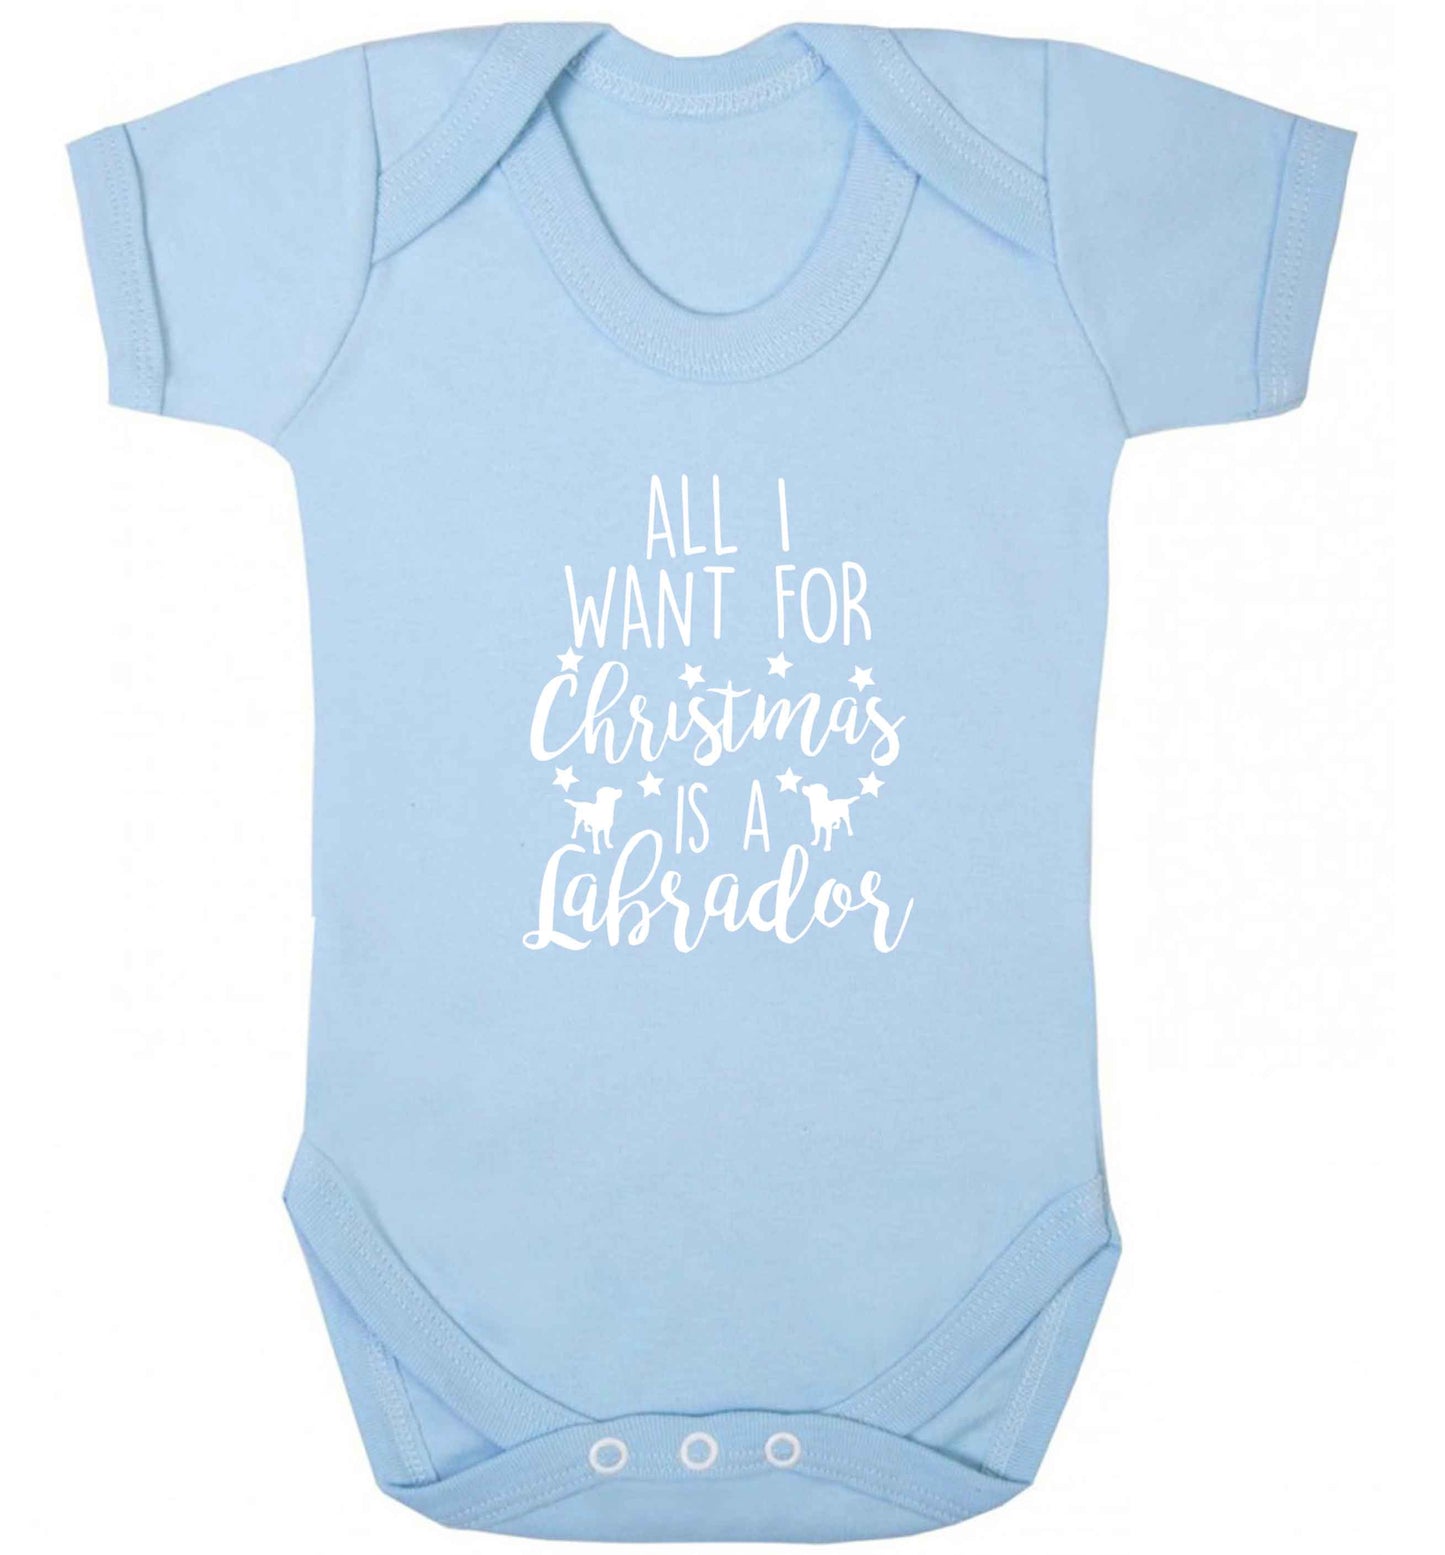 All I want for Christmas is a labrador baby vest pale blue 18-24 months